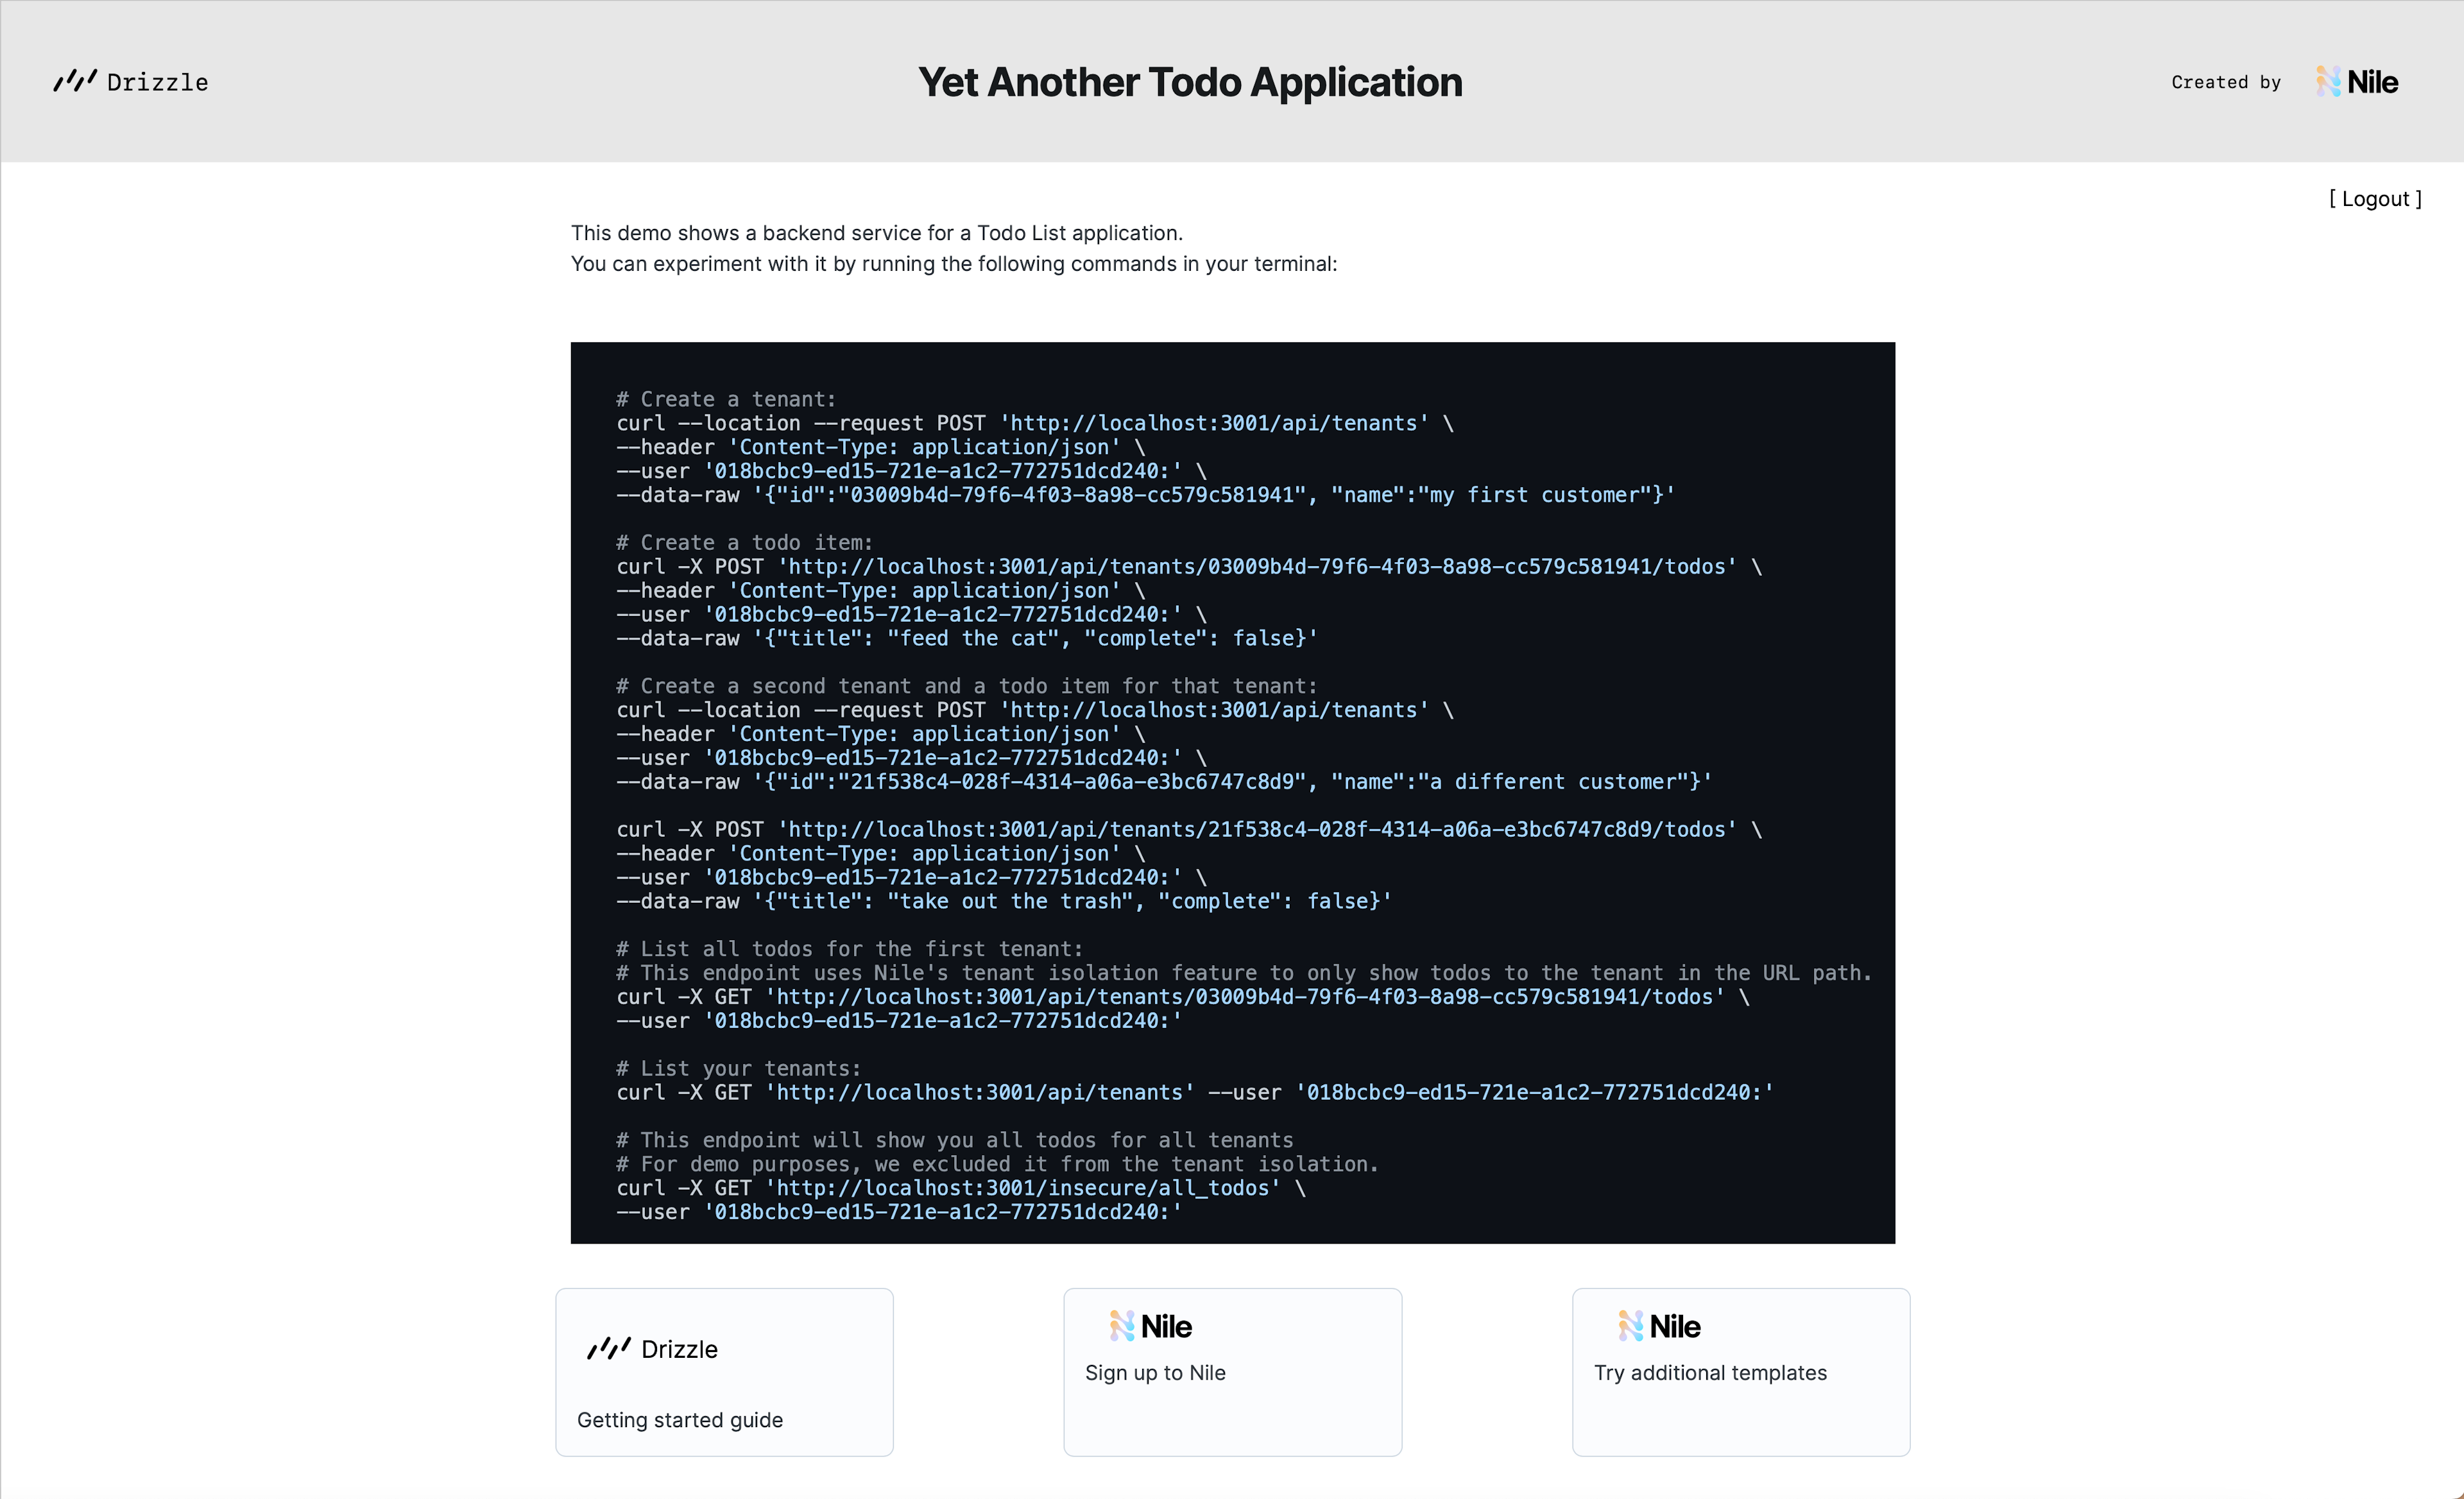 screen shot for Drizzle multi-tenant application with Nile template